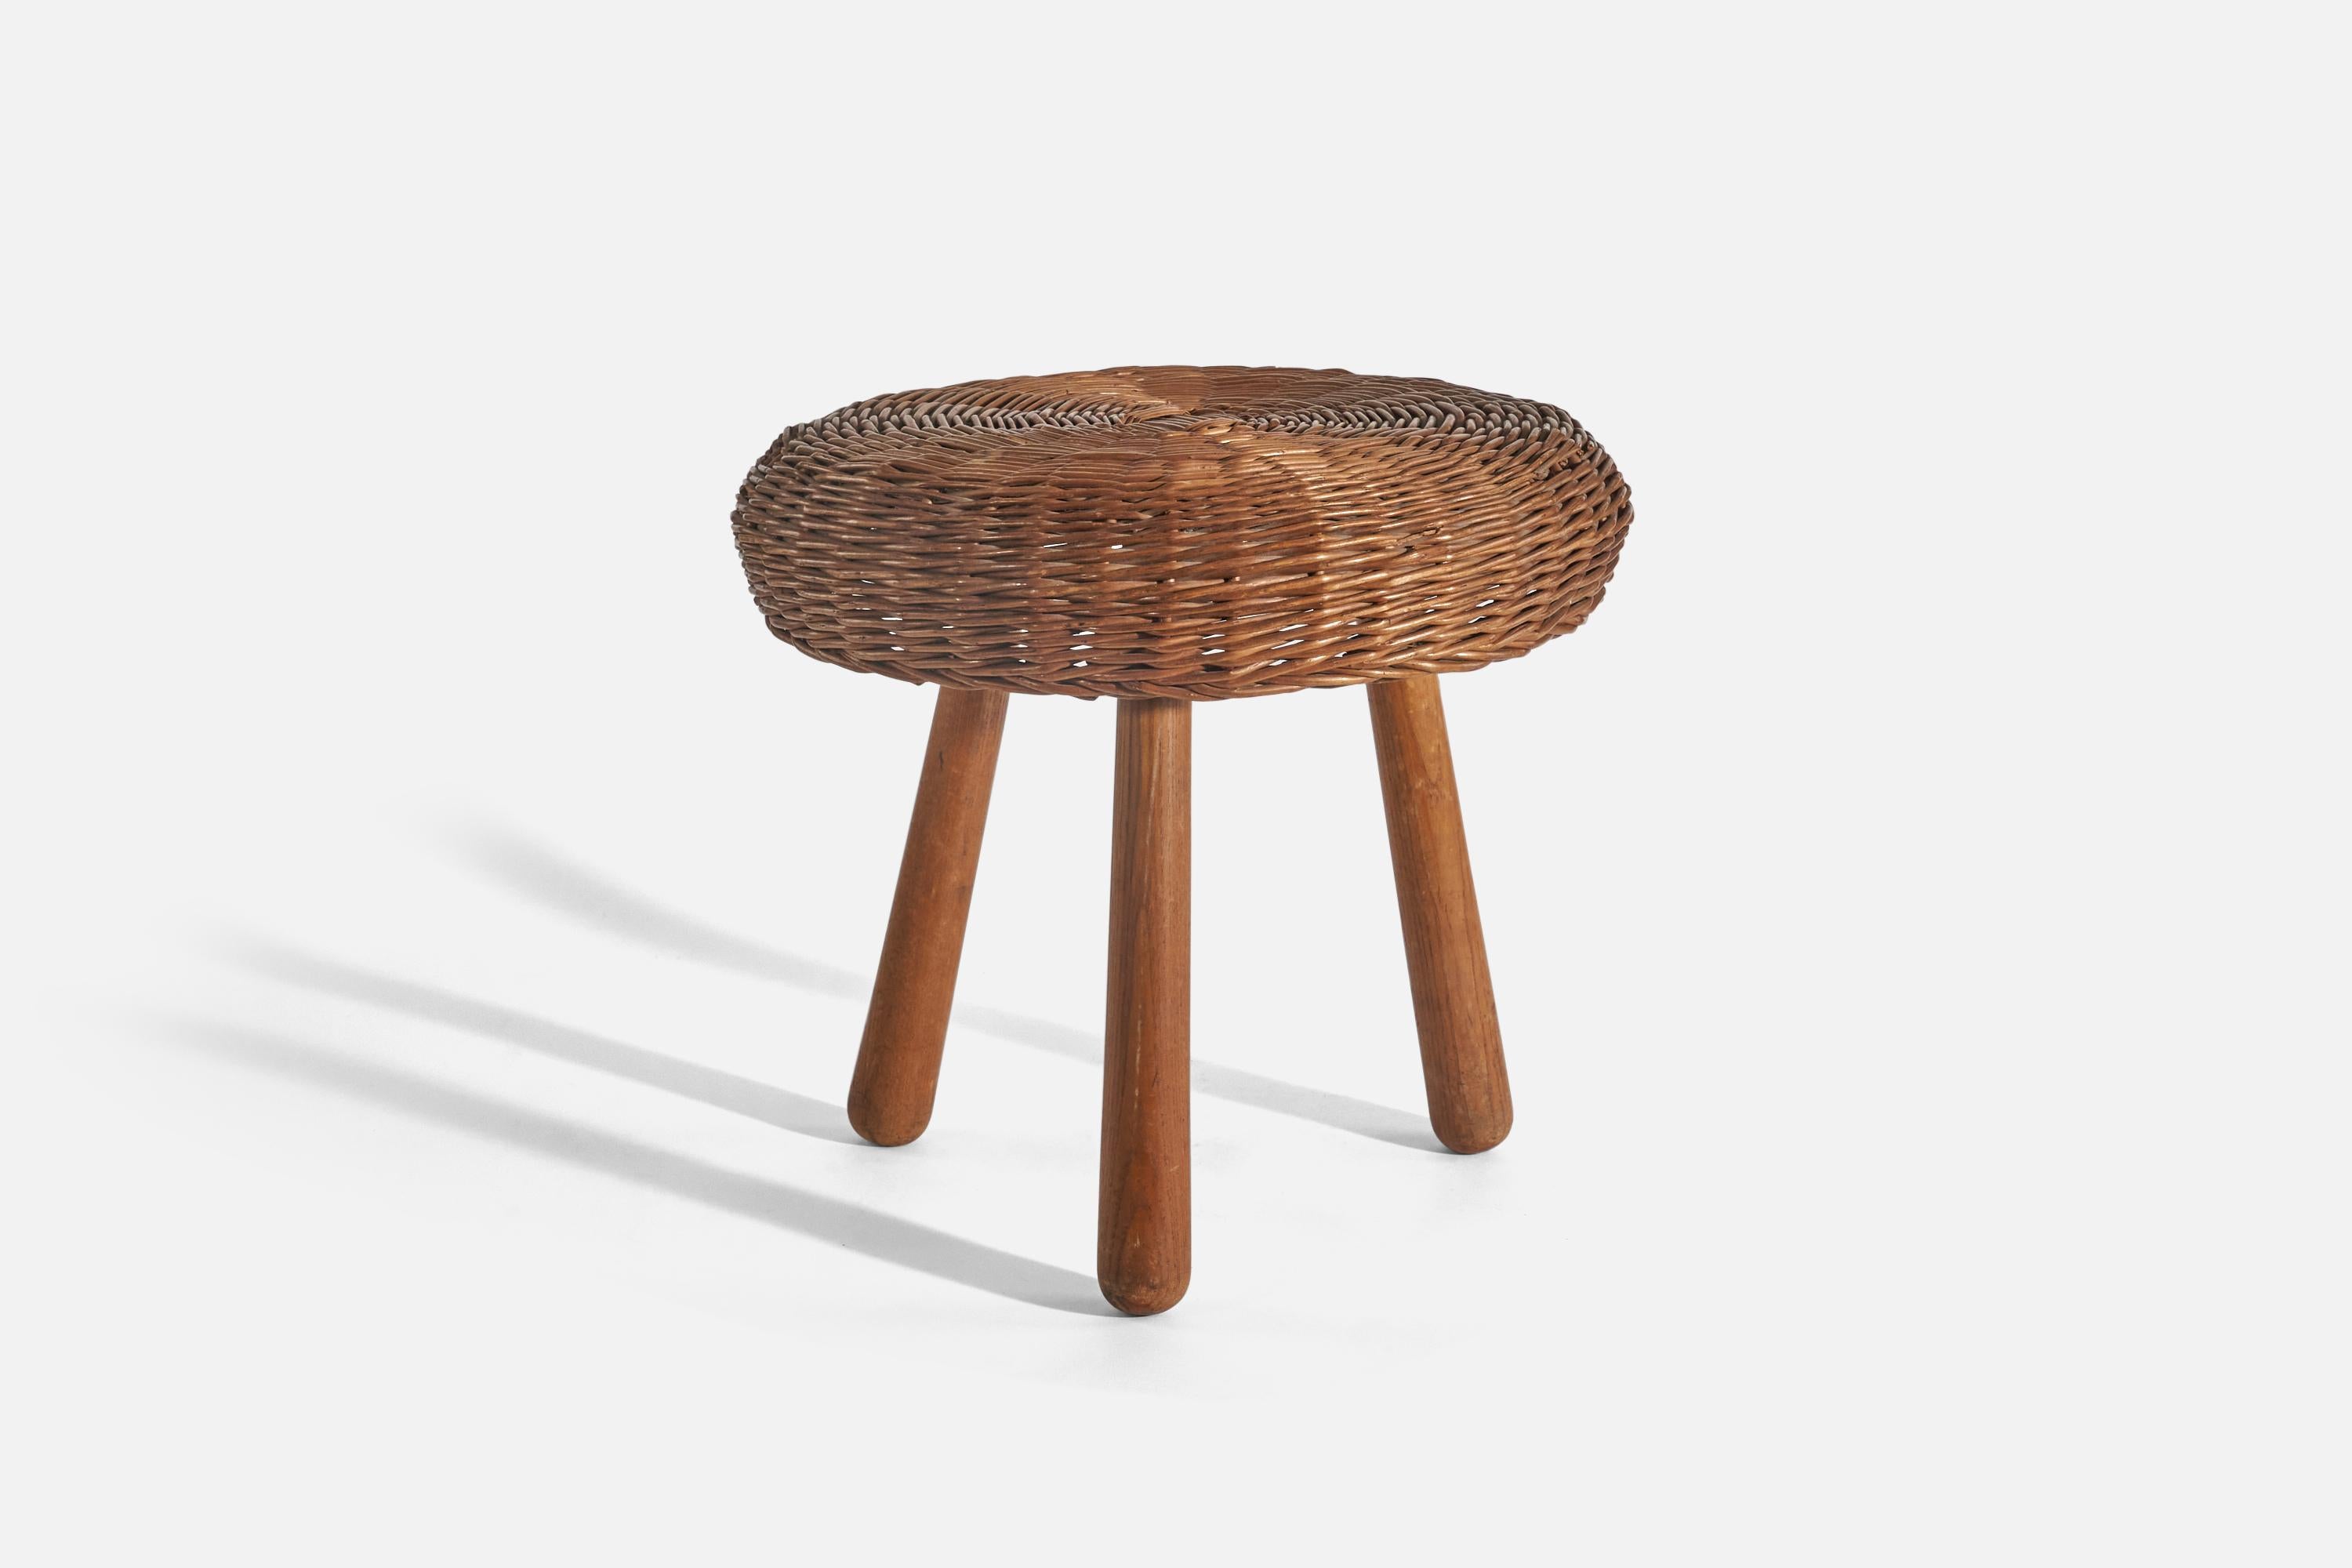 A wicker and wooden stool designed and produced by Tony Paul, United States, 1950s.
 